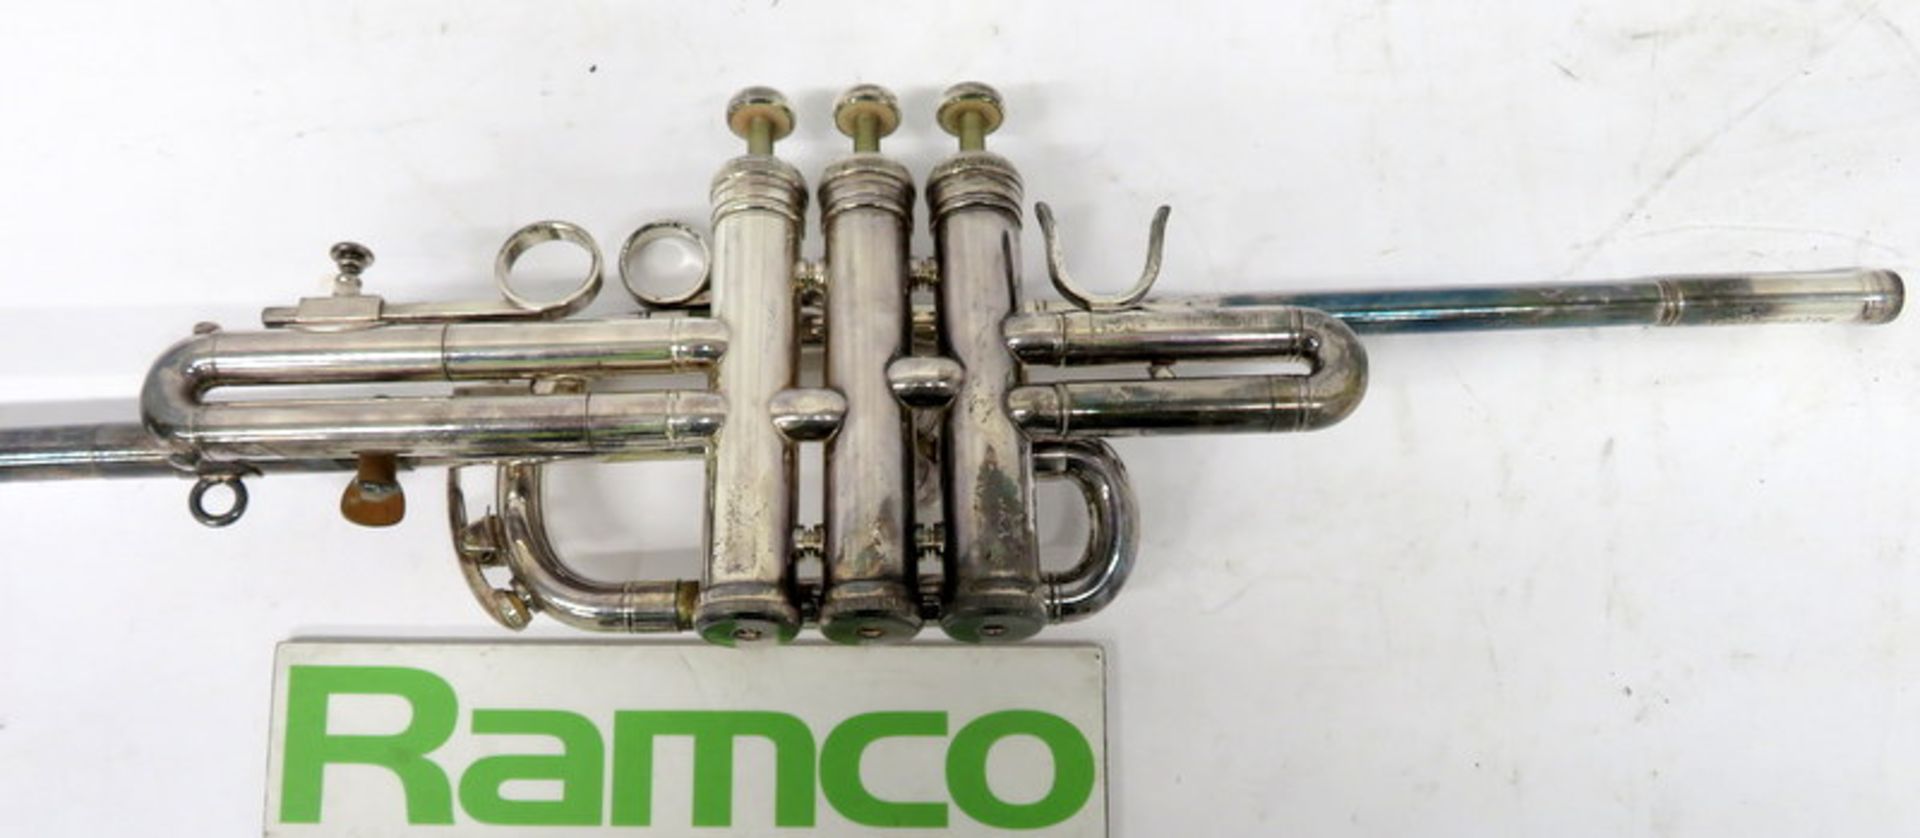 Besson International BE706 Fanfare Trumpet With Case. Serial Number: 867824. Please Note T - Image 8 of 19